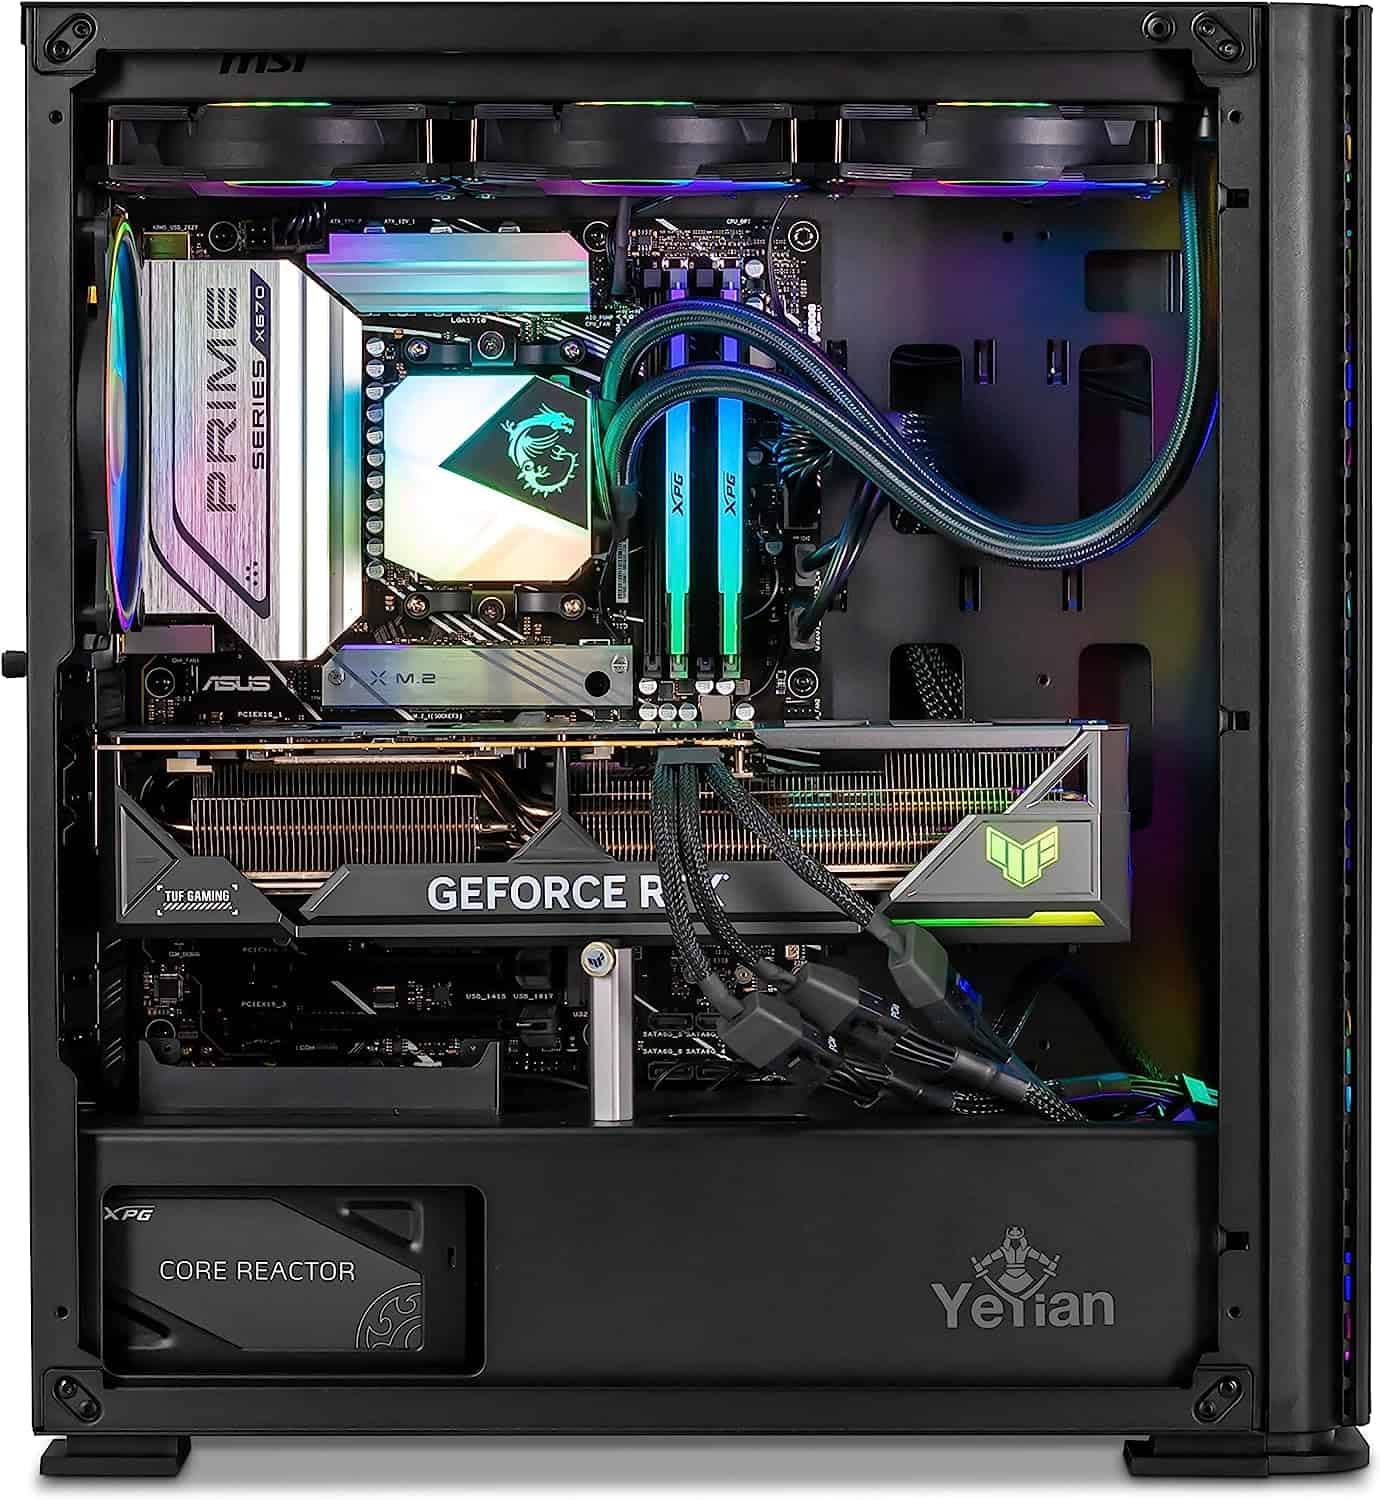 Custom-built YEYIAN ODACHI Gaming PC with RGB lighting, water cooling, and high-end components inside a transparent case.